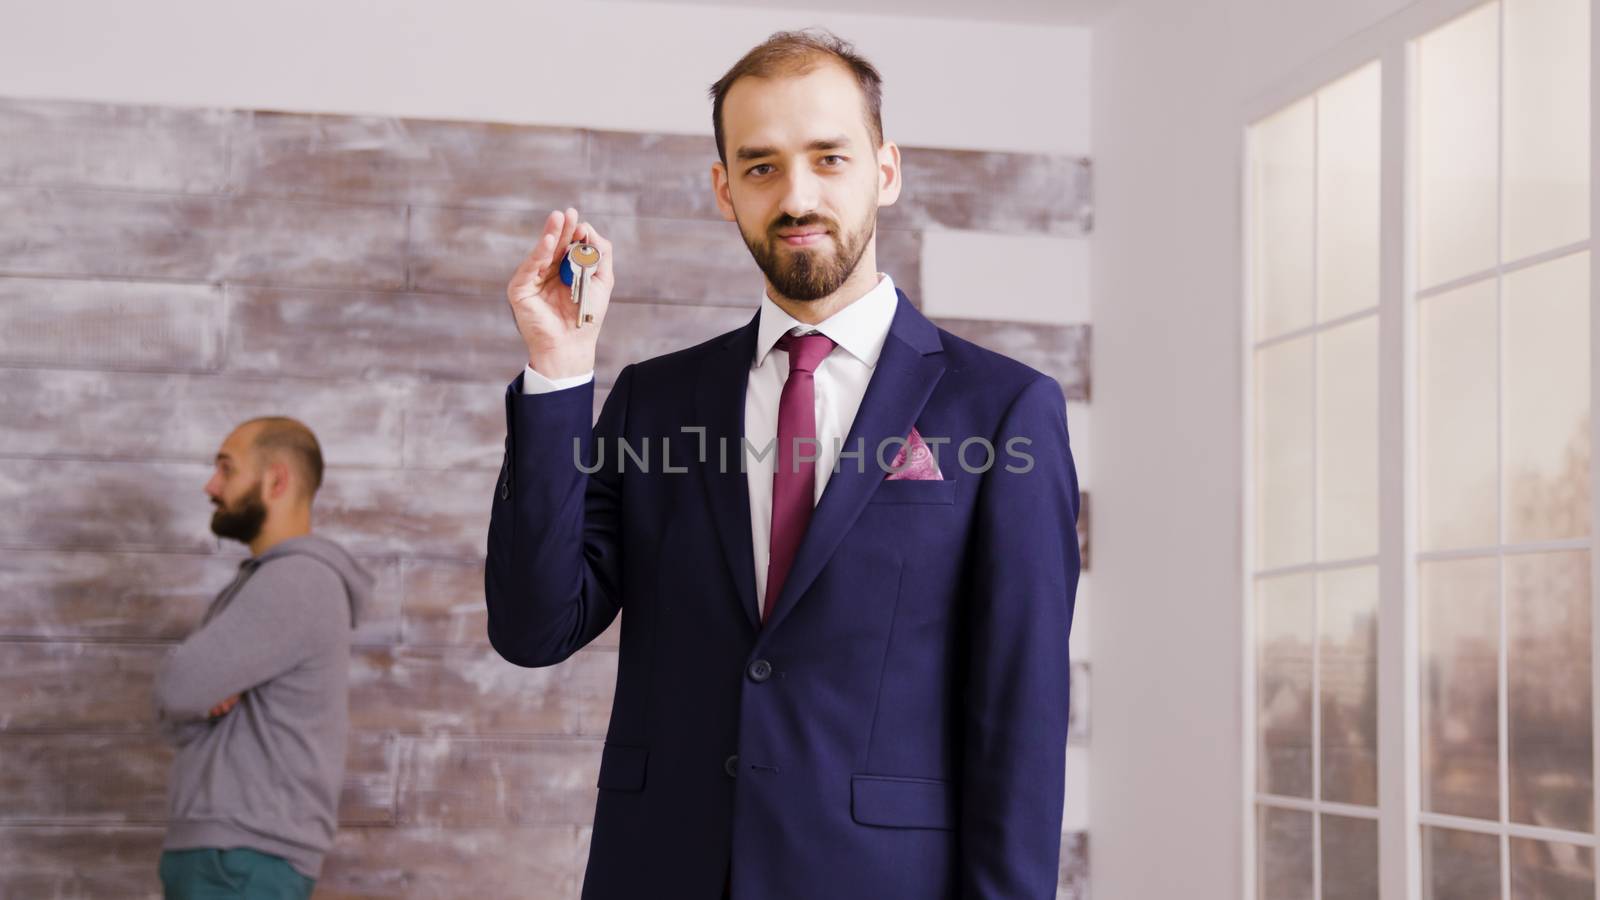 Bearded real estate agent in business suit showing apartment keys to the camera. Couple talking in the background.